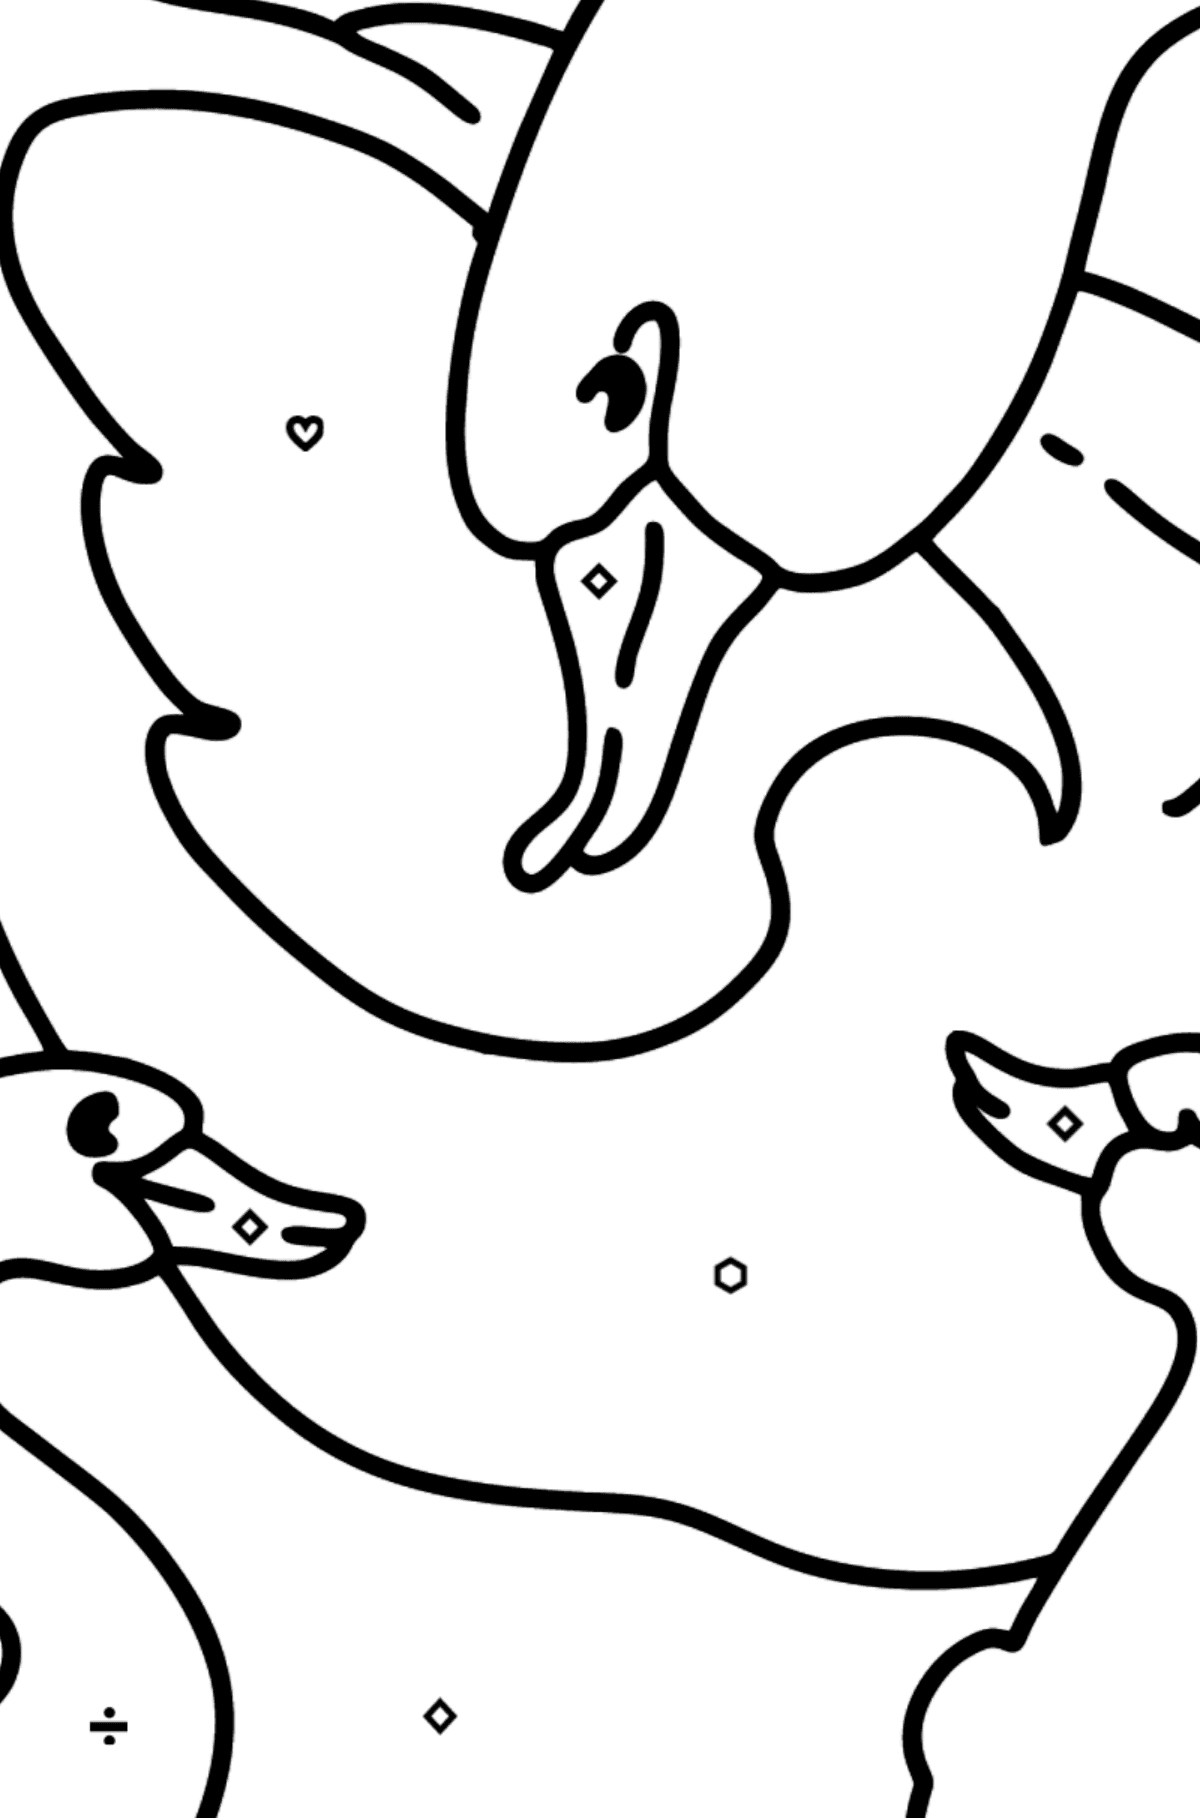 Duck with Ducklings on the Lake coloring page - Coloring by Symbols and Geometric Shapes for Kids